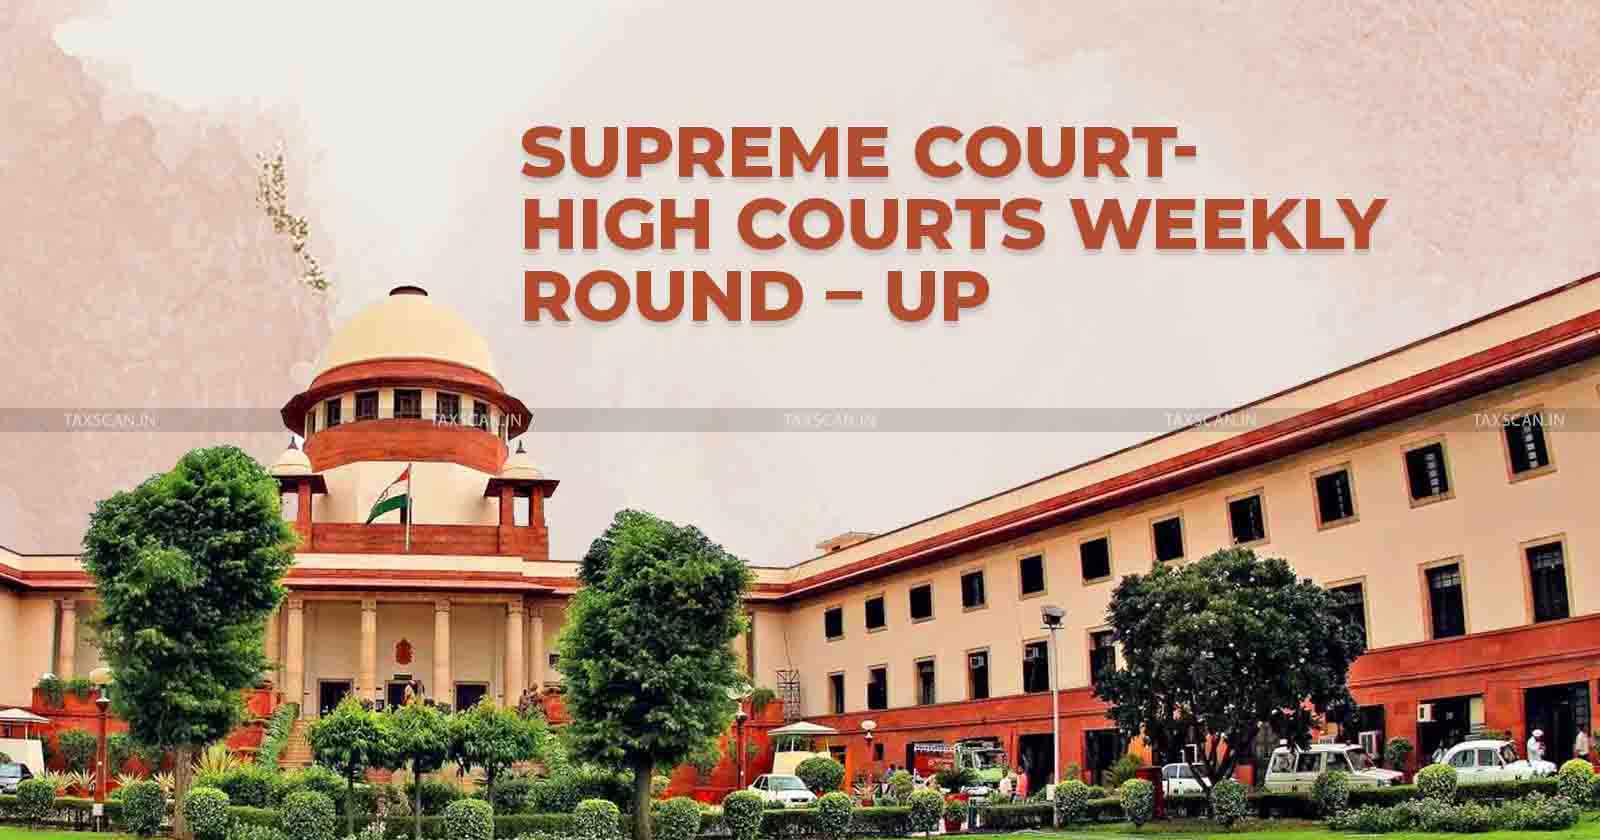 Supreme Court and High Court Weekly Round-Up - Weekly Round-Up - Supreme Court Weekly Round-Up - taxscan